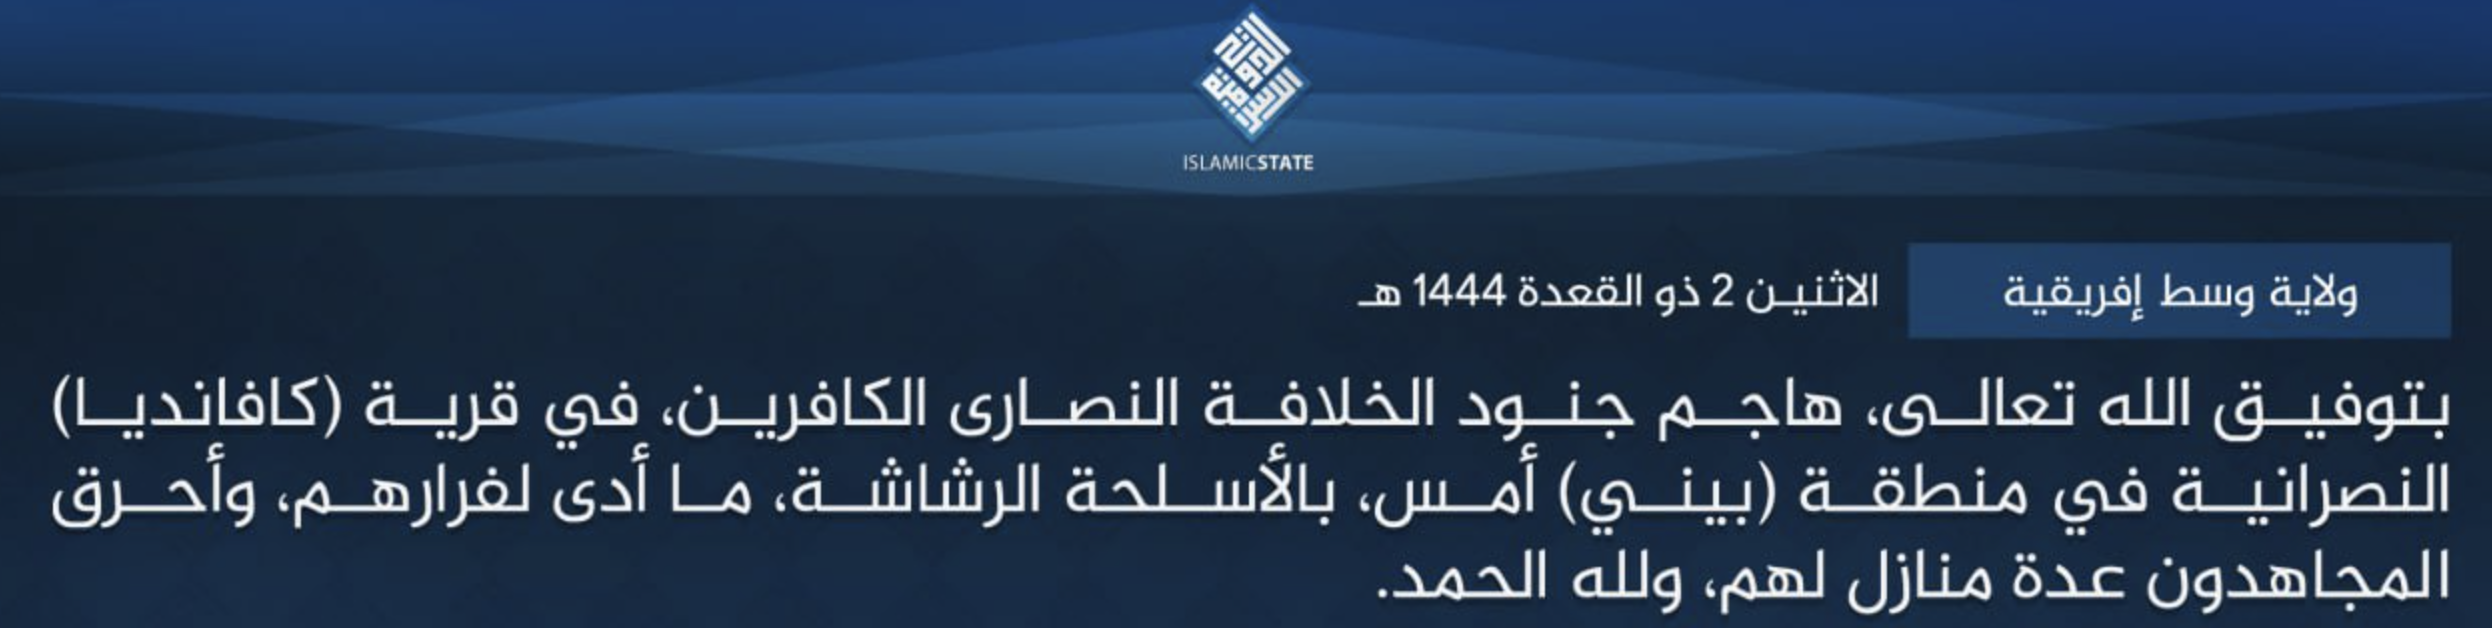 Islamic State Central Africa (ISCA/Wilayat Wasat Afriqiyah) Armed Assault Forces Residents to Flee Christian Village of Kavandia, Beni Region, North-Kivu Province, Congo (DR)